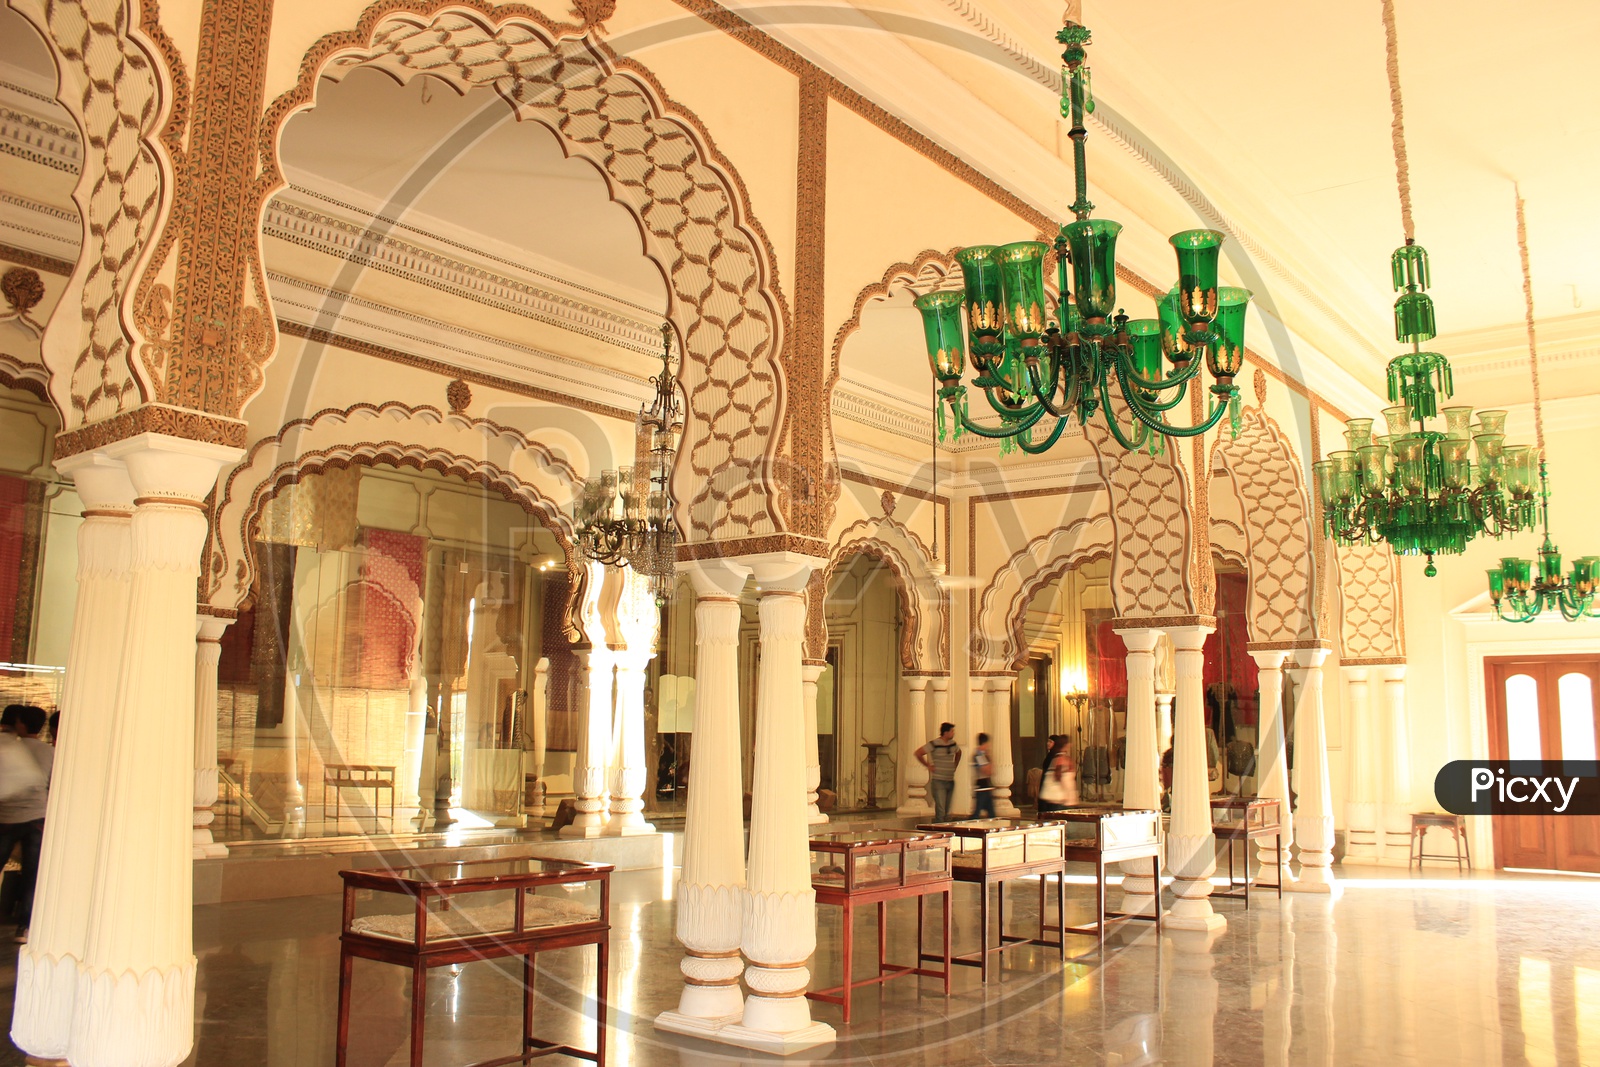 Interior Of Chowmahalla Palace With Corridors And Chandeliers